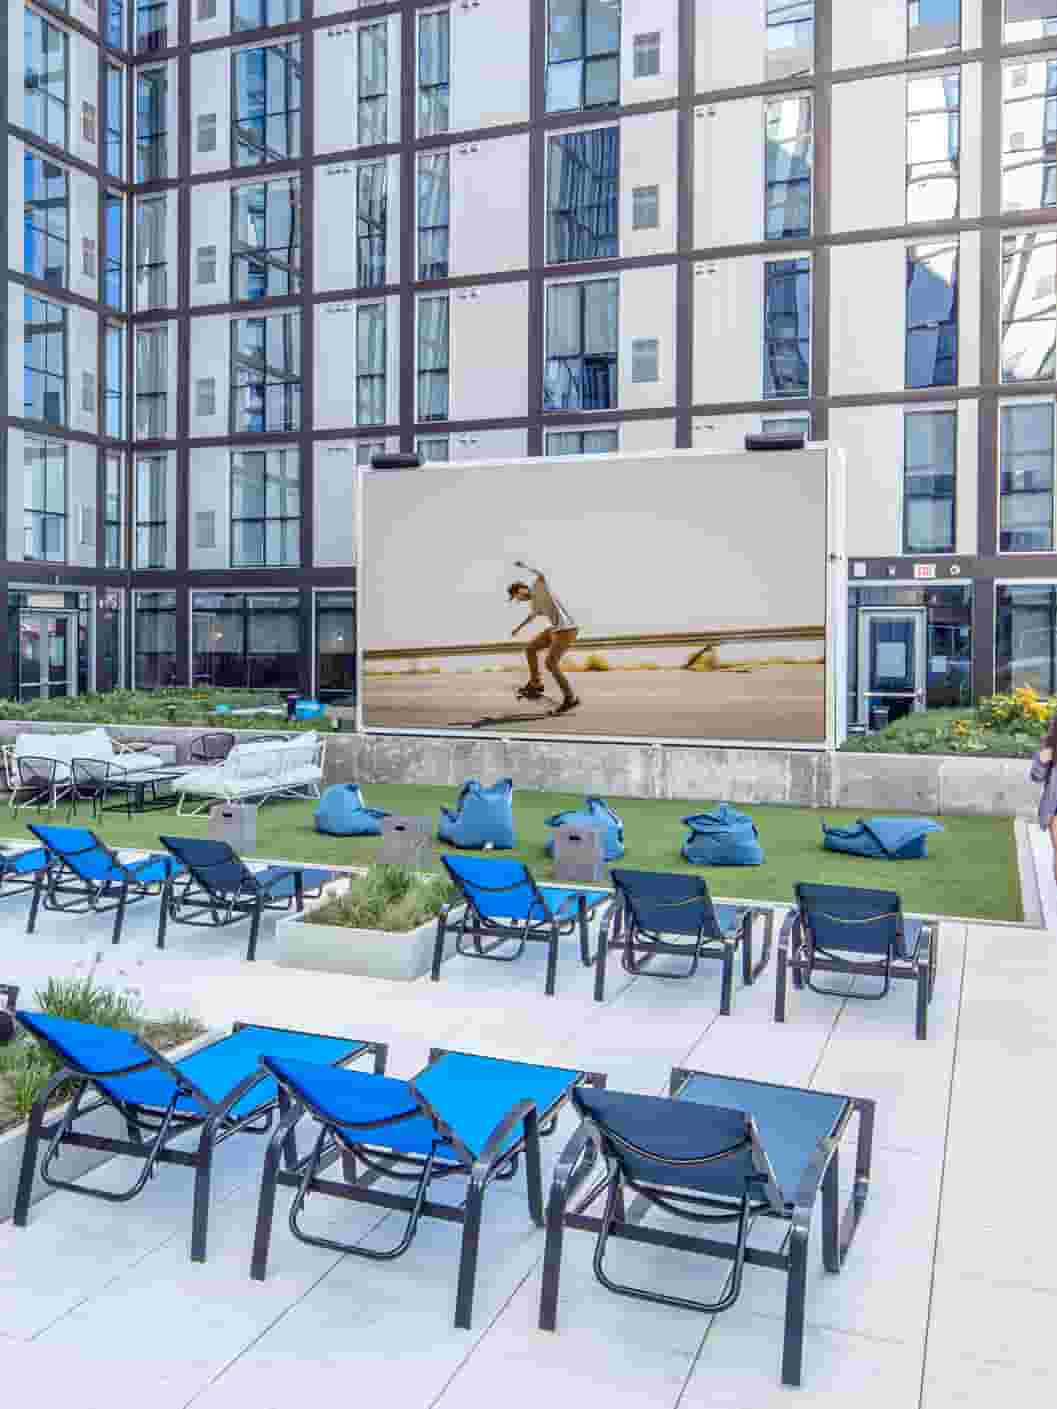 Student apartments with Jumbotron on Courtyard Deck